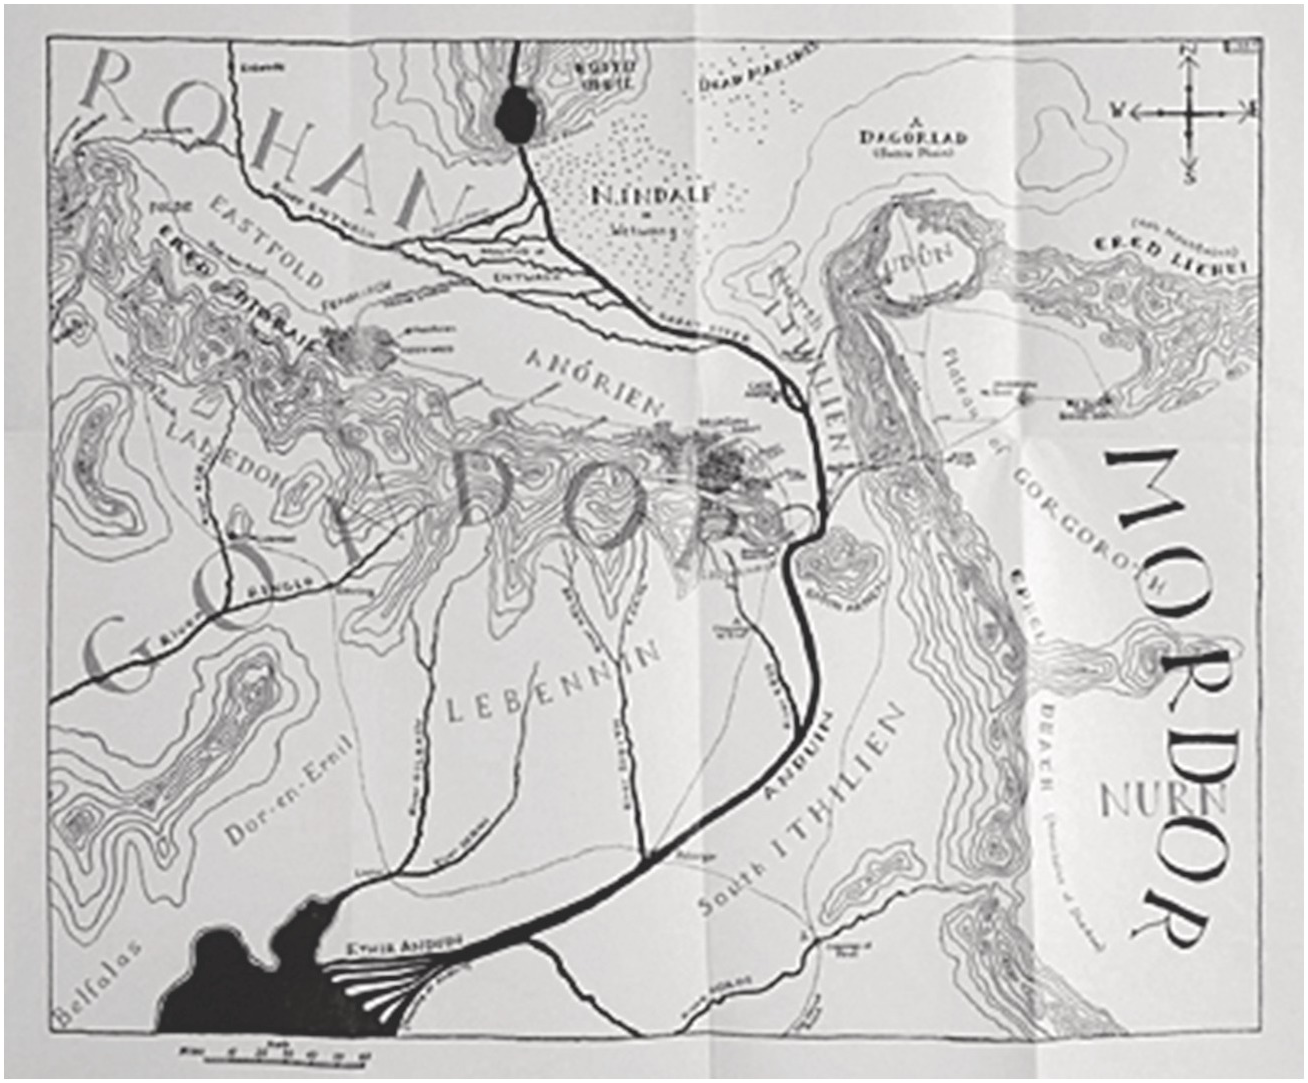 map of Minas Tirith from the Lord of the Rings by JRR Tolkien